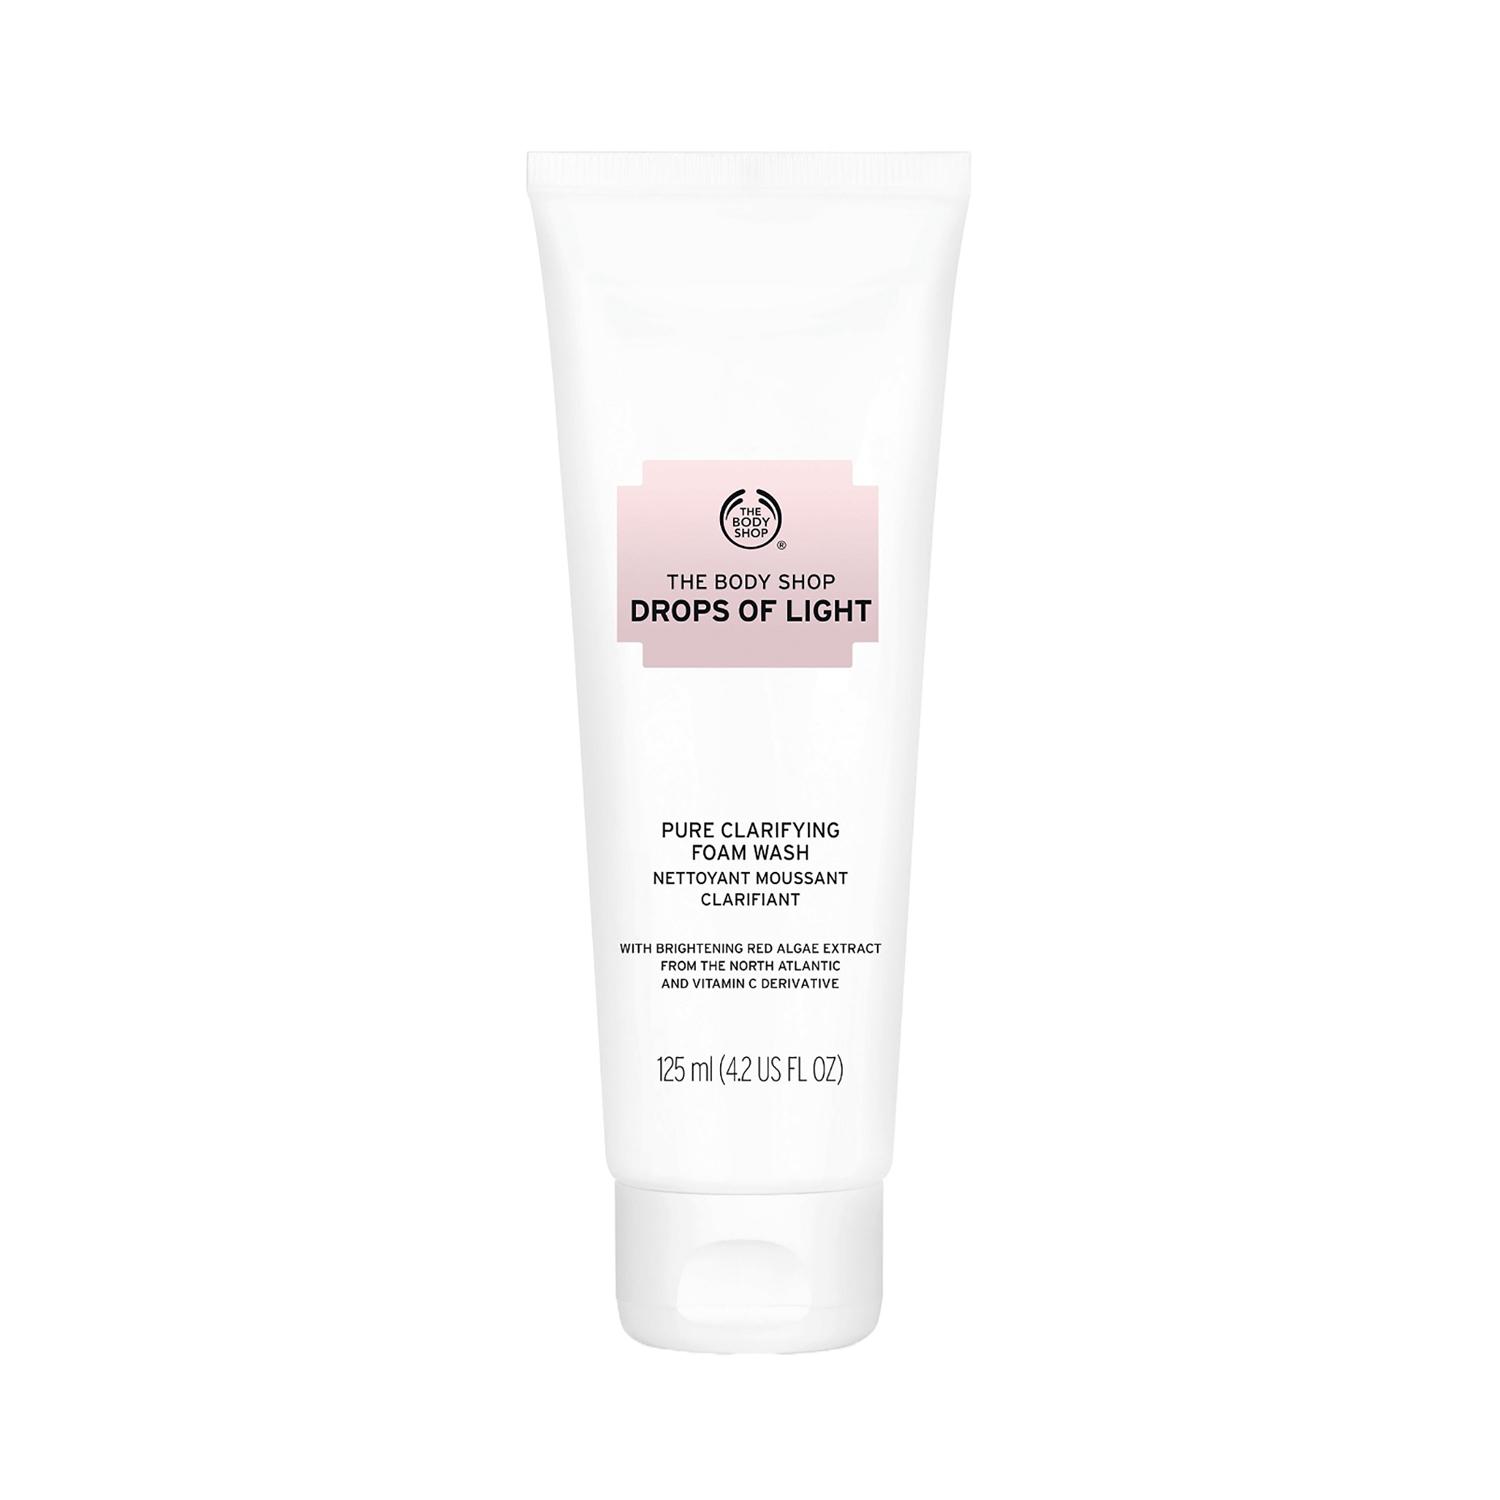 the body shop drops of light brightening cleansing foam cleanser (125ml)